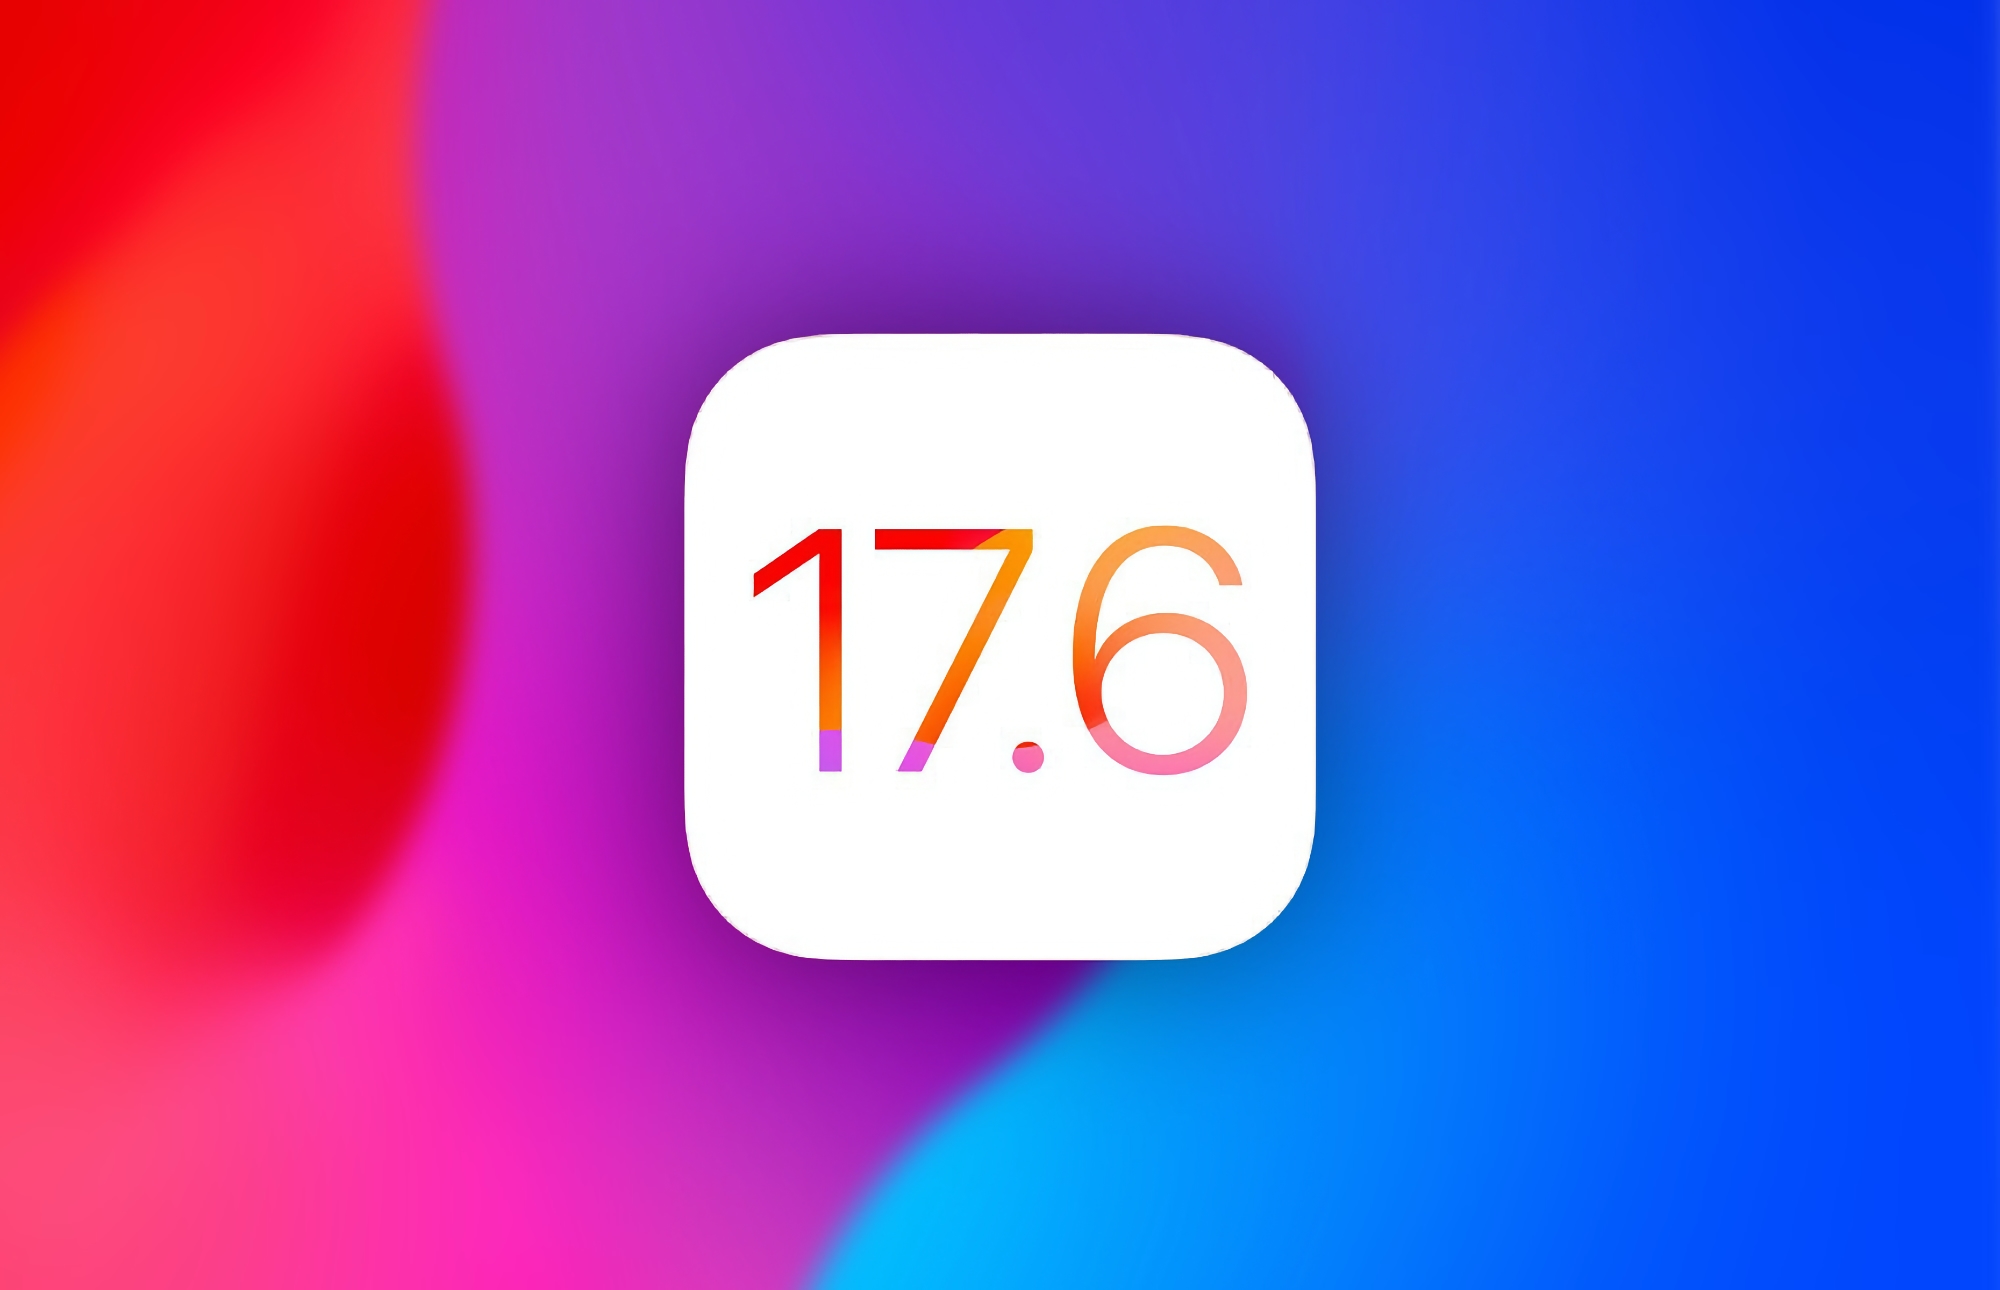 Apple has released the fourth beta of iOS 17.6